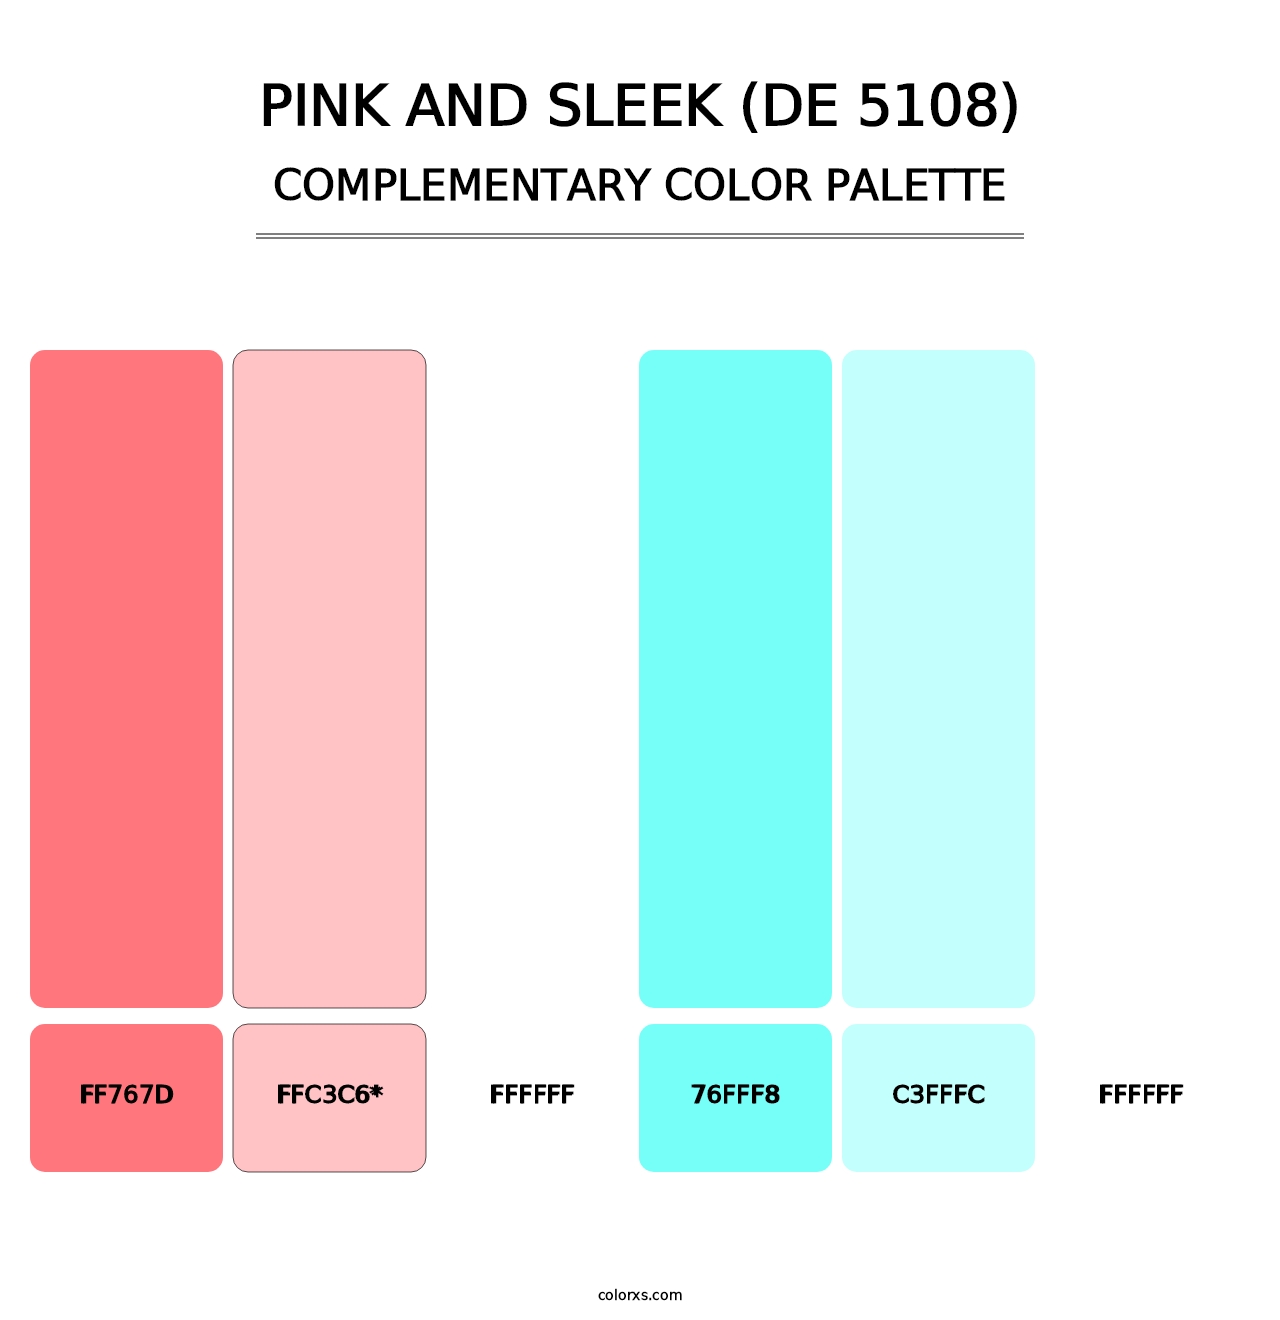 Pink and Sleek (DE 5108) - Complementary Color Palette